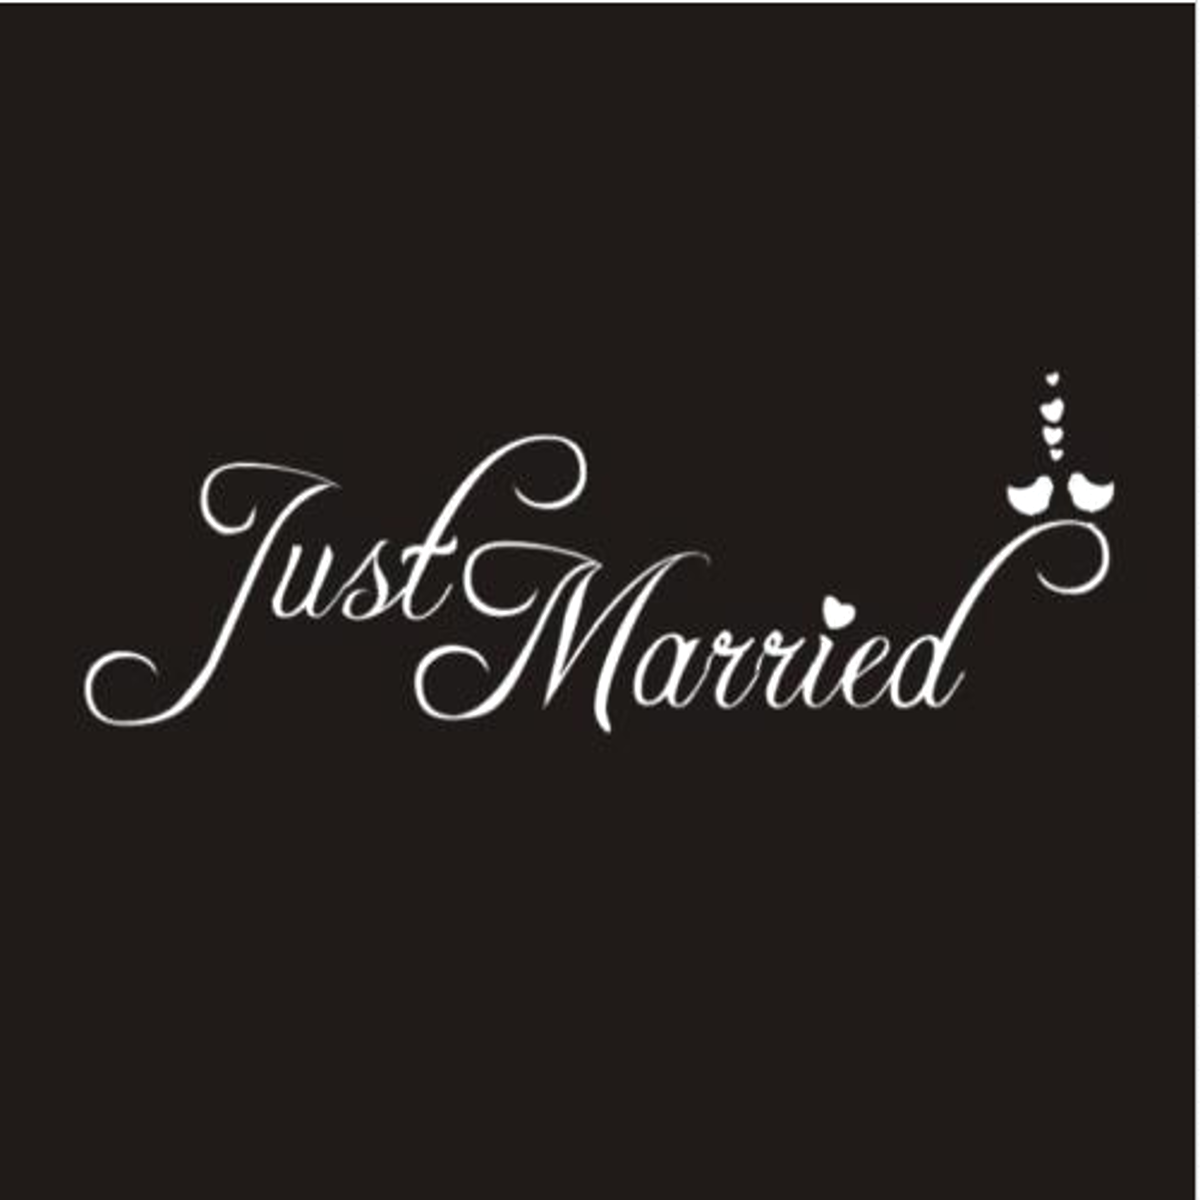 Black Car Cling Decal Sticker Just Married Wedding Window Banner Decoration